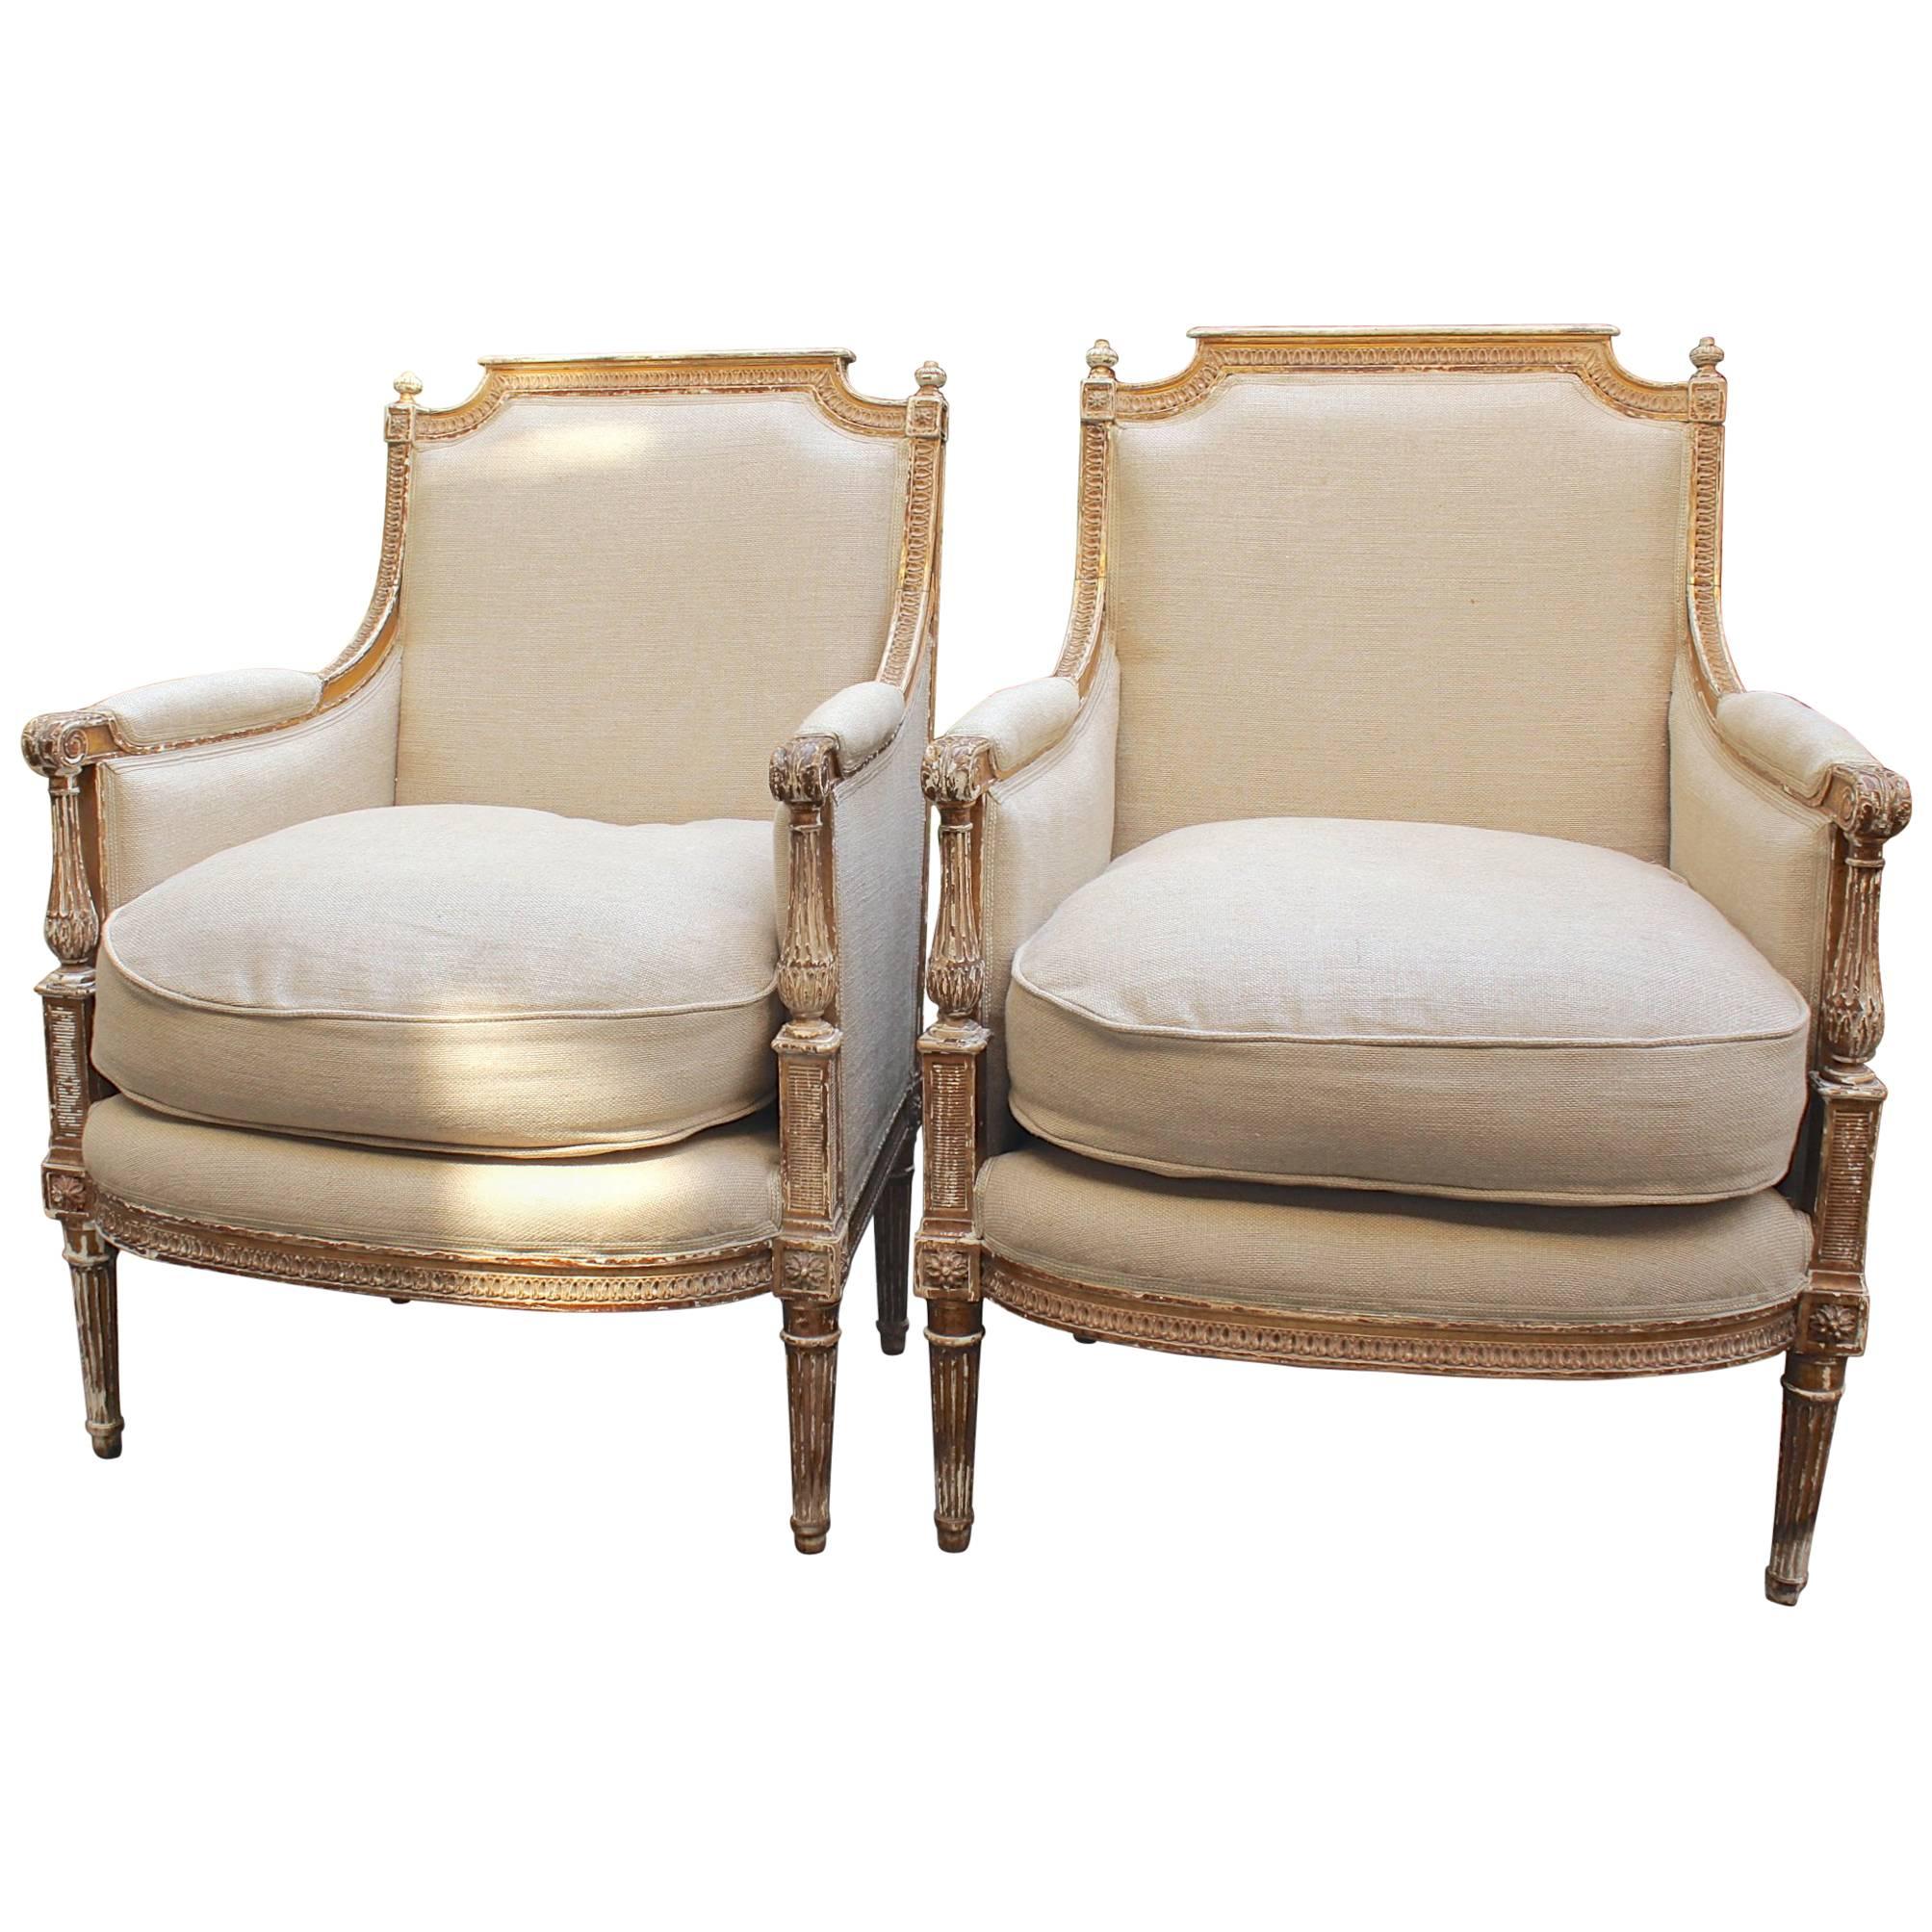 Pair of Antique French Late 18th-Early 19th Century Louis XVI Bergeres